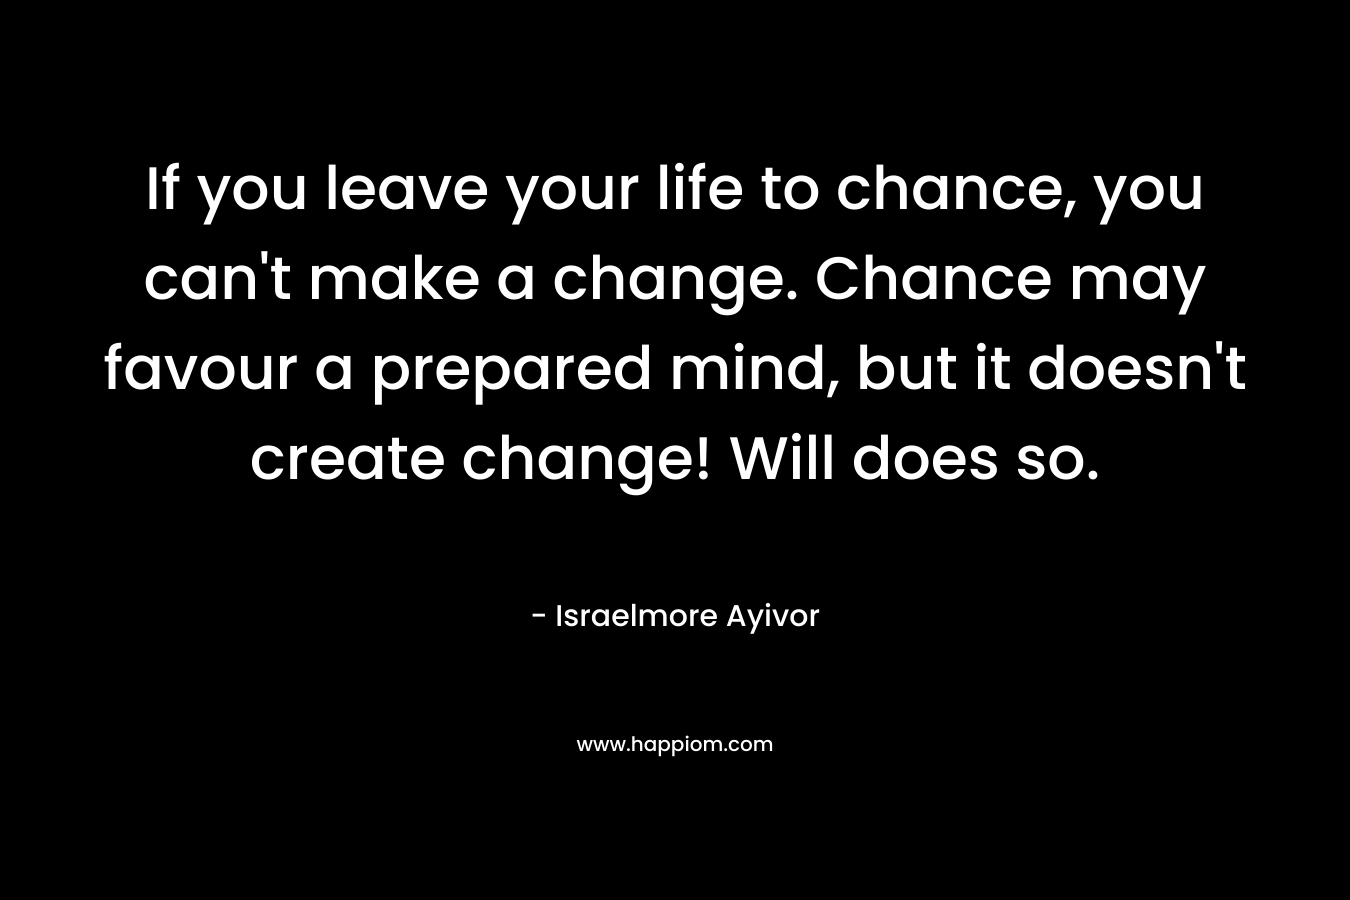 If you leave your life to chance, you can't make a change. Chance may favour a prepared mind, but it doesn't create change! Will does so.